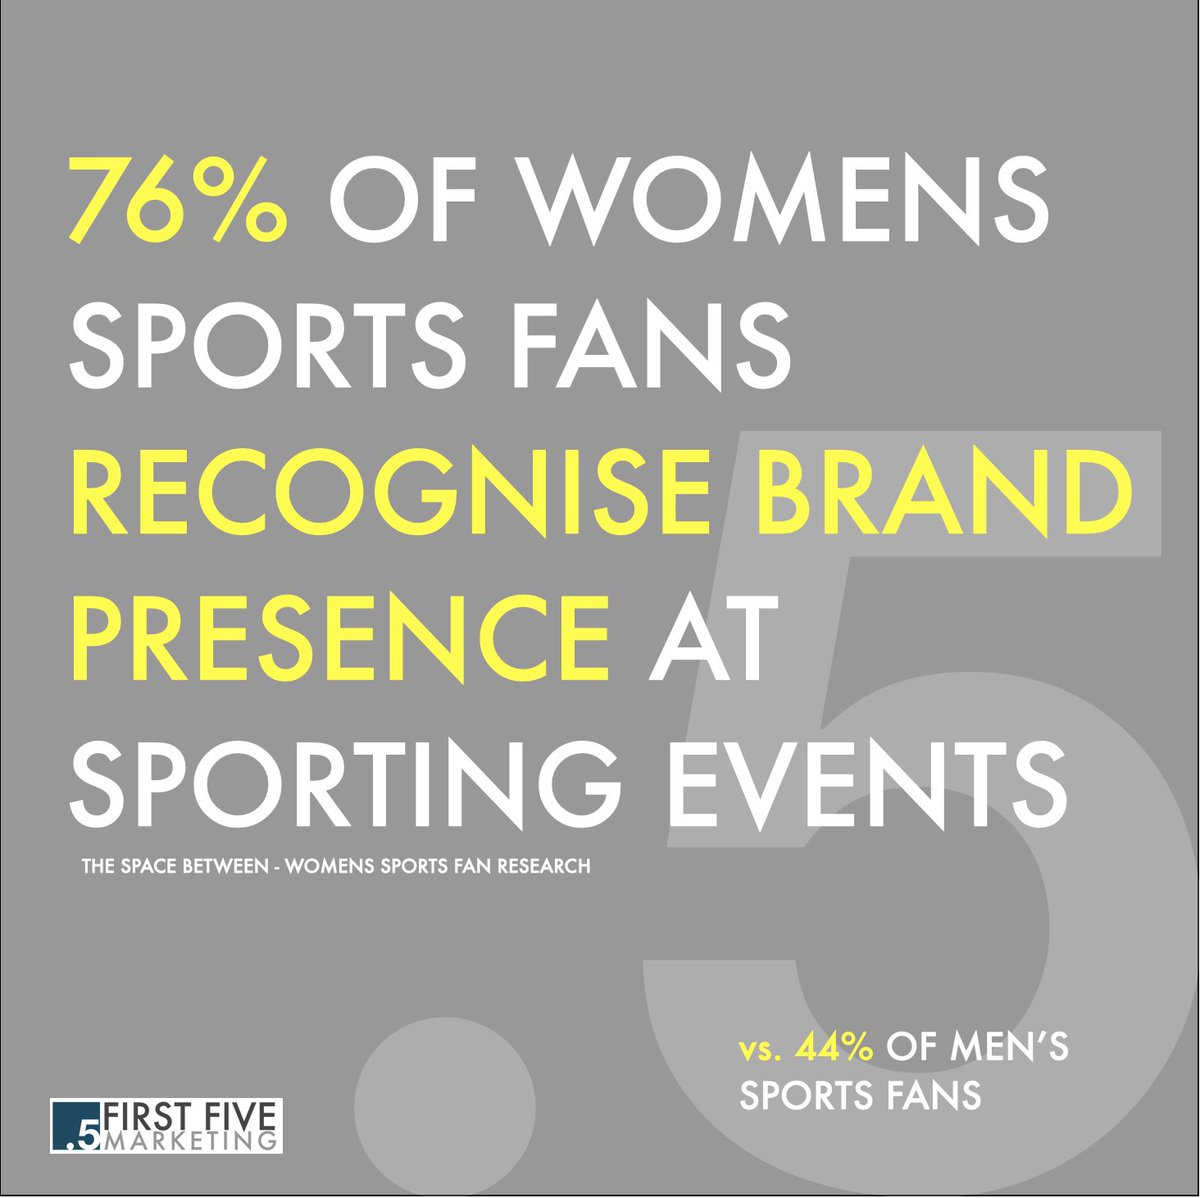 Research released by @space_between & @Womeninsport_uk makes it loud & clear there is commercial opportunity as well as a philanthropic duty of care here  👍 

#sportsmarketing #brandstrategy #sportsbusiness #athletemarketing #sportsbusiness  #inclusion #equality #sportsequality